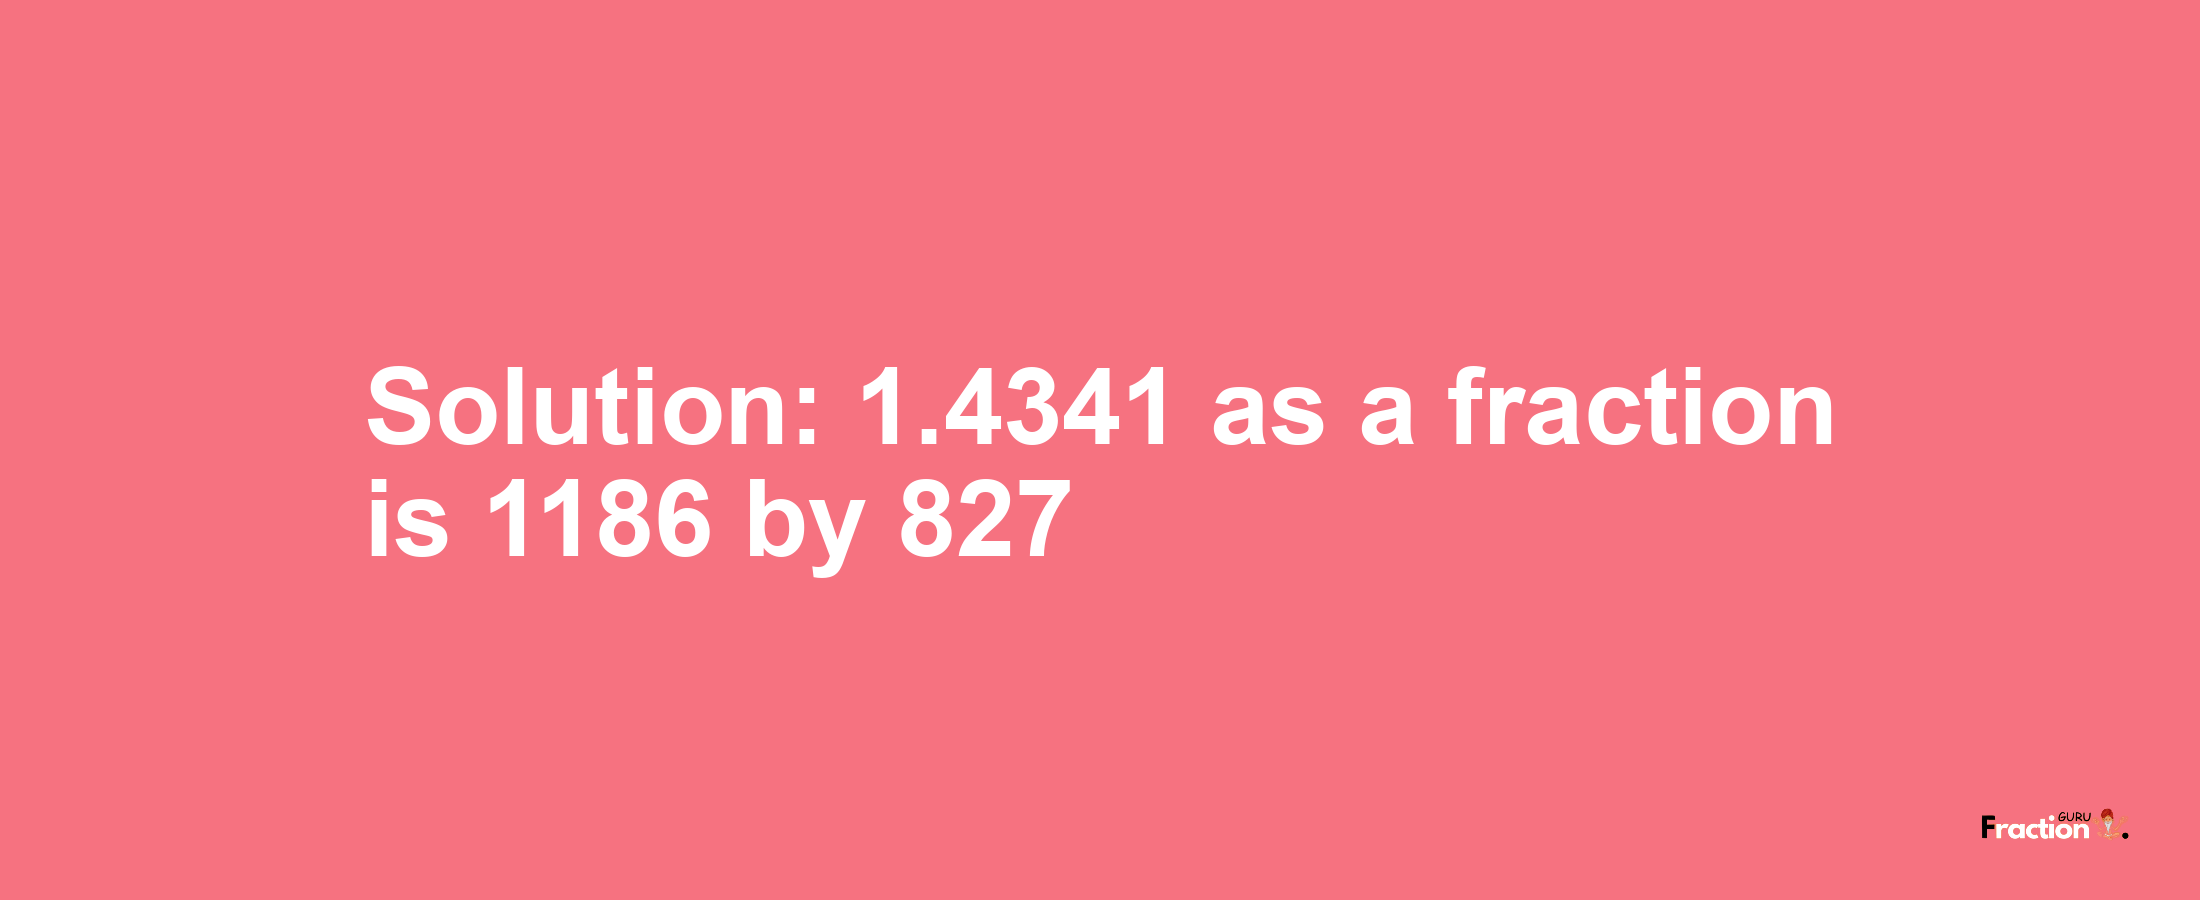 Solution:1.4341 as a fraction is 1186/827